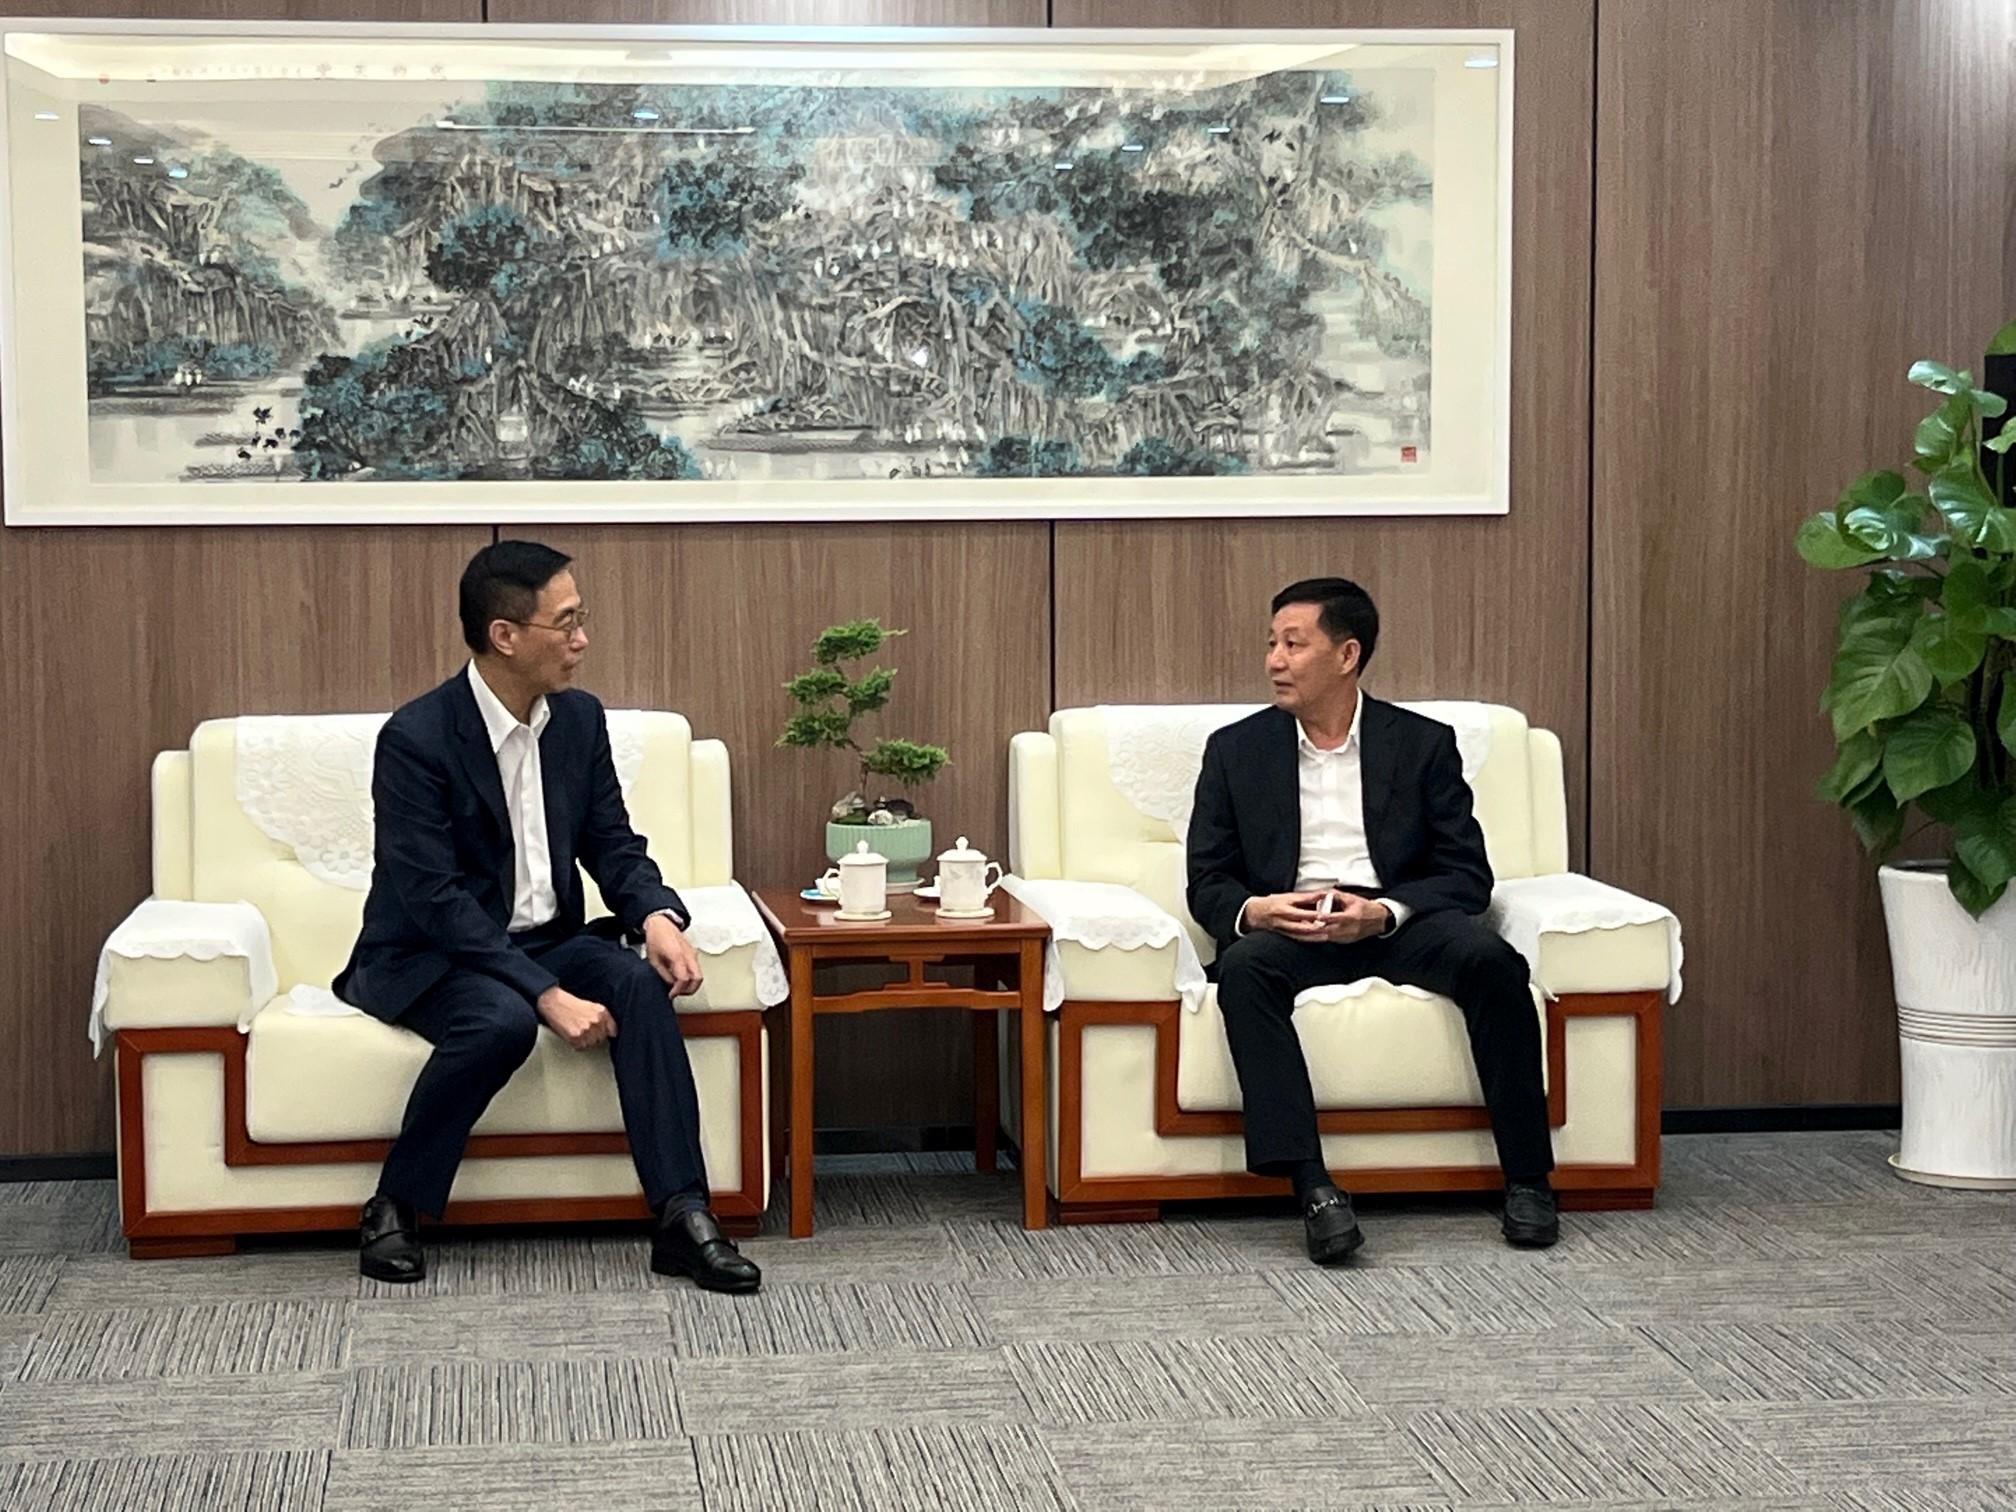 The Secretary for Culture, Sports and Tourism, Mr Kevin Yeung (left), meets with Vice Mayor of the Jiangmen Municipal People's Government Mr Lin Jiansheng (right) in Jiangmen yesterday (August 16) to discuss the direction for co-operation on culture and tourism development.